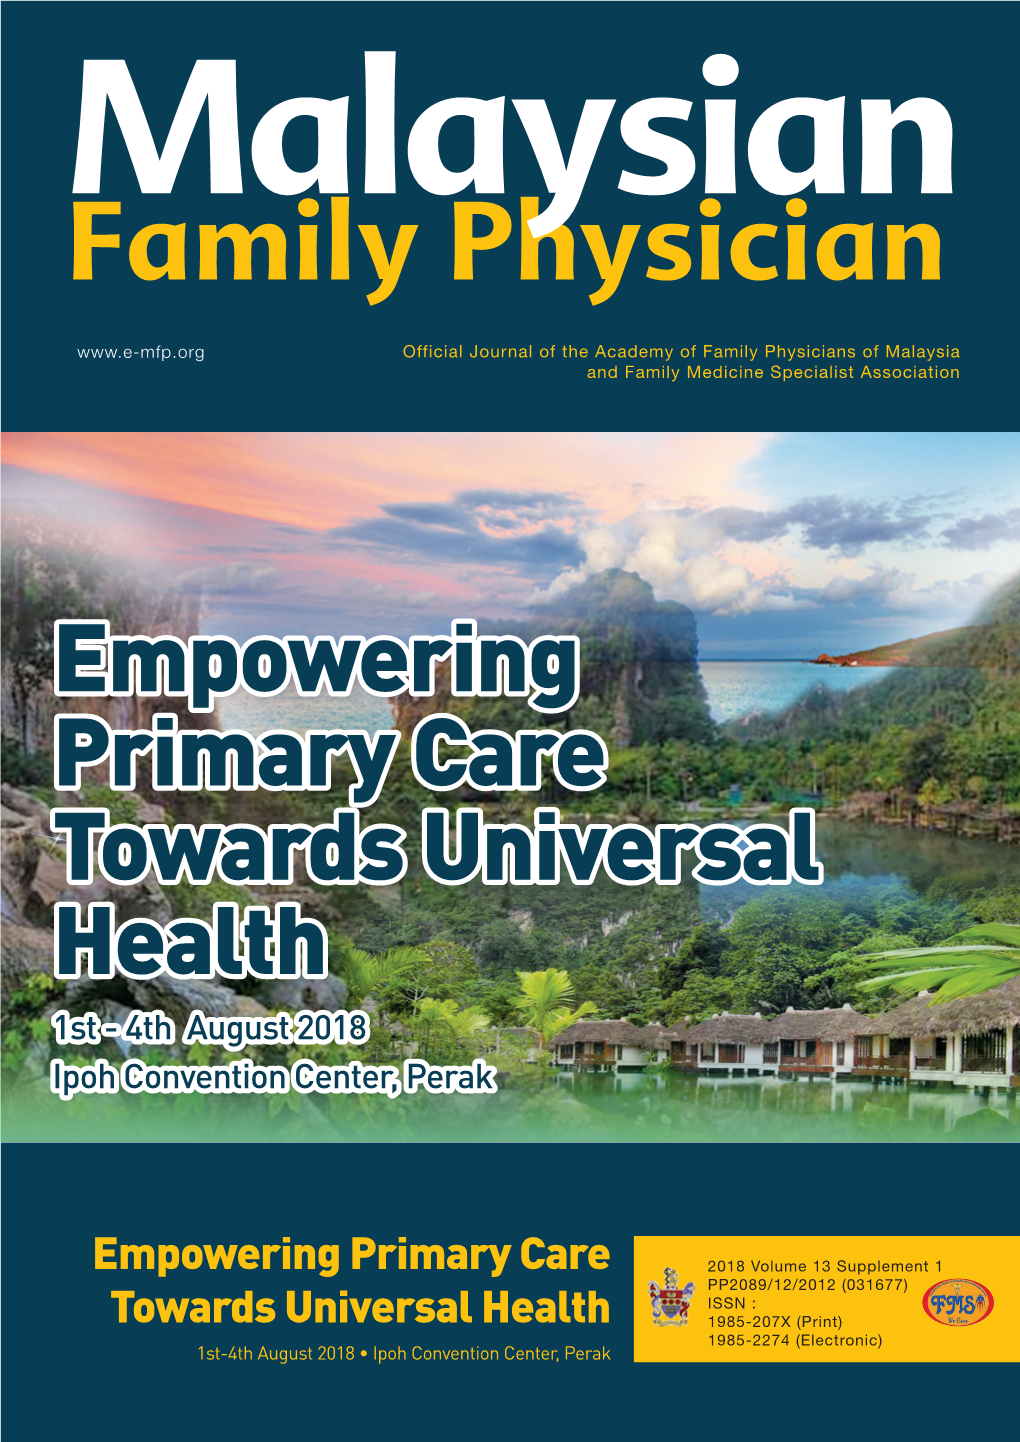 Empowering Primary Care Towards Universal Health 1St - 4Th August 2018 Ipoh Convention Center, Perak